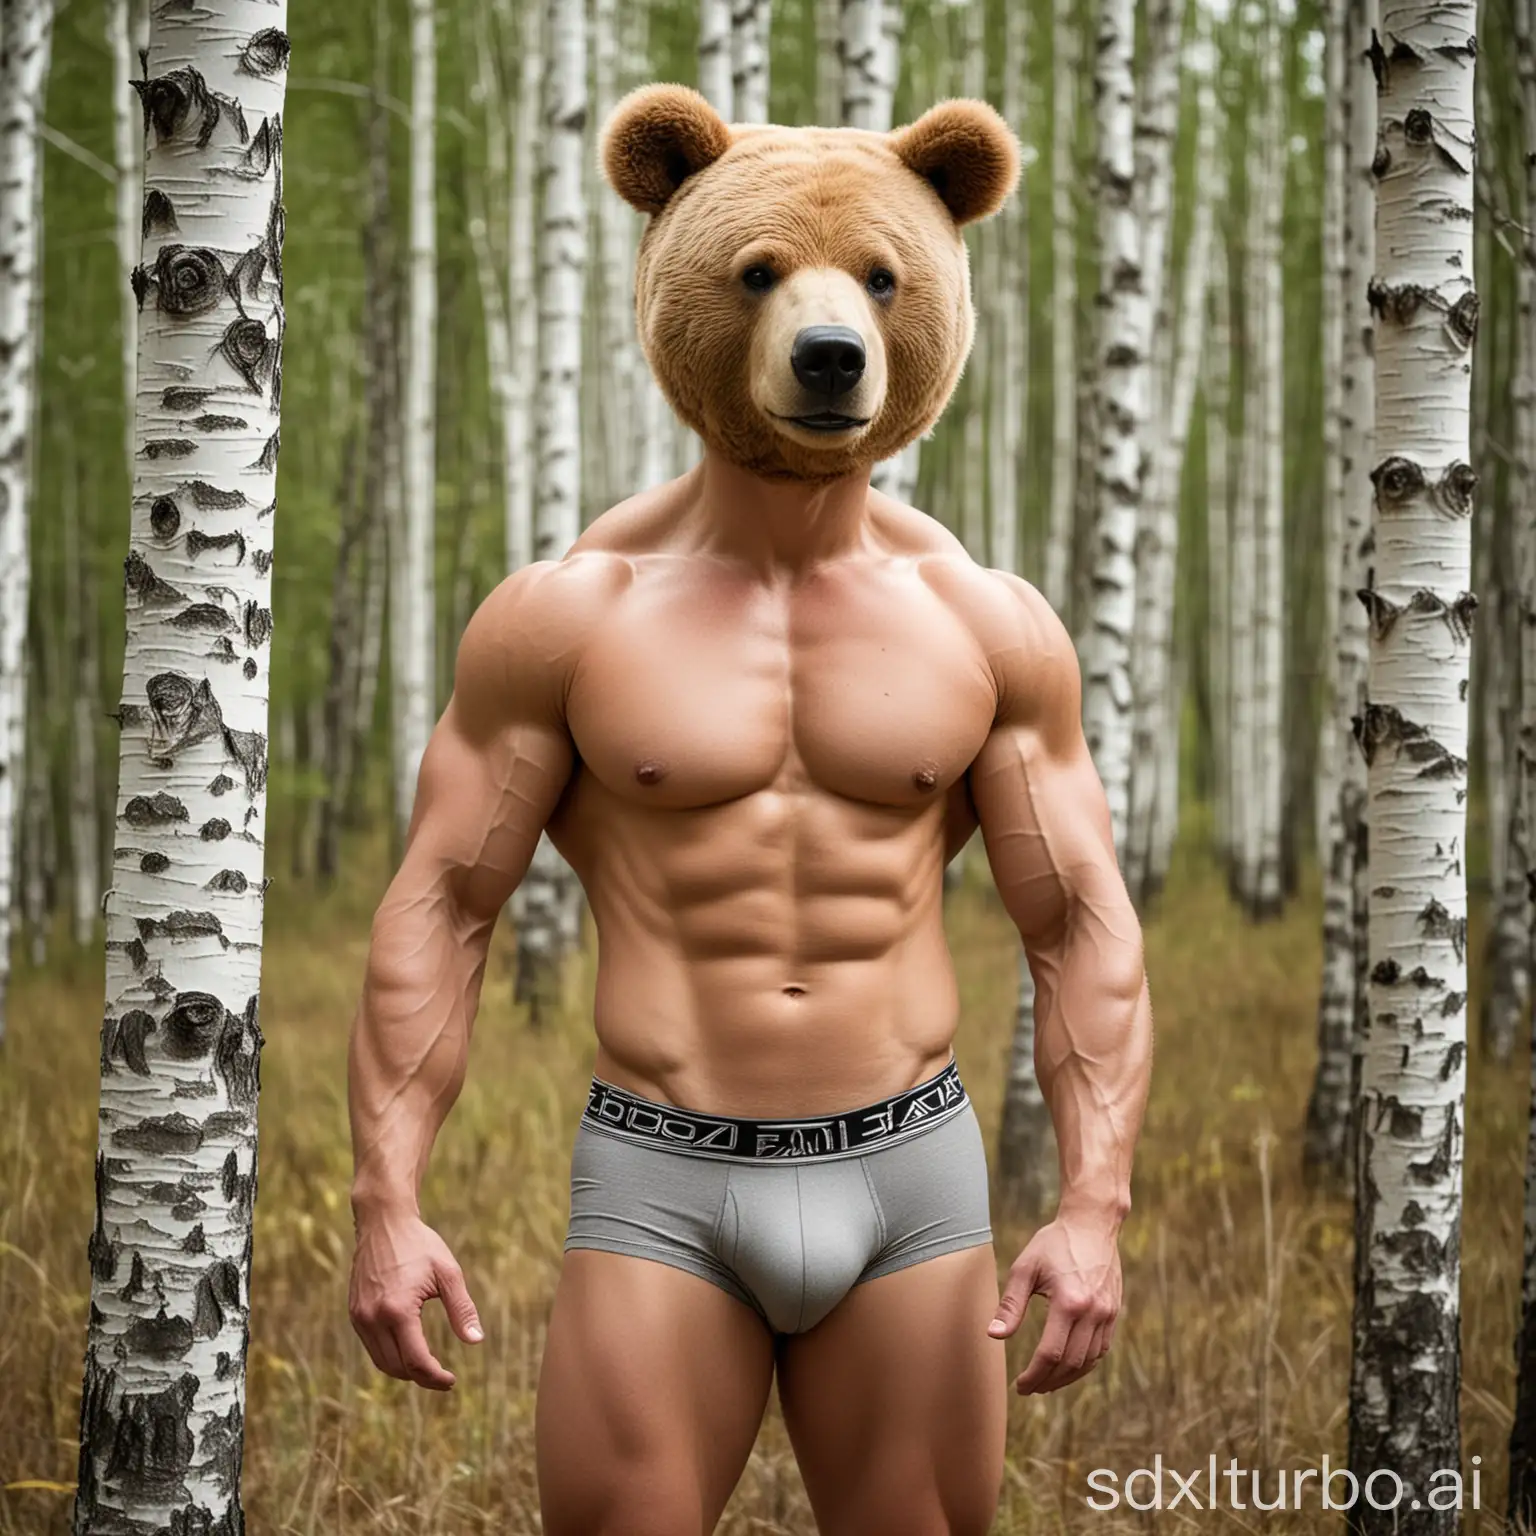 over-bodybuilder man in underpants with a bear head on the front of them in a birch grove, a real photo pentax 55mm f/1.6 helios-44m, epic, dynamic